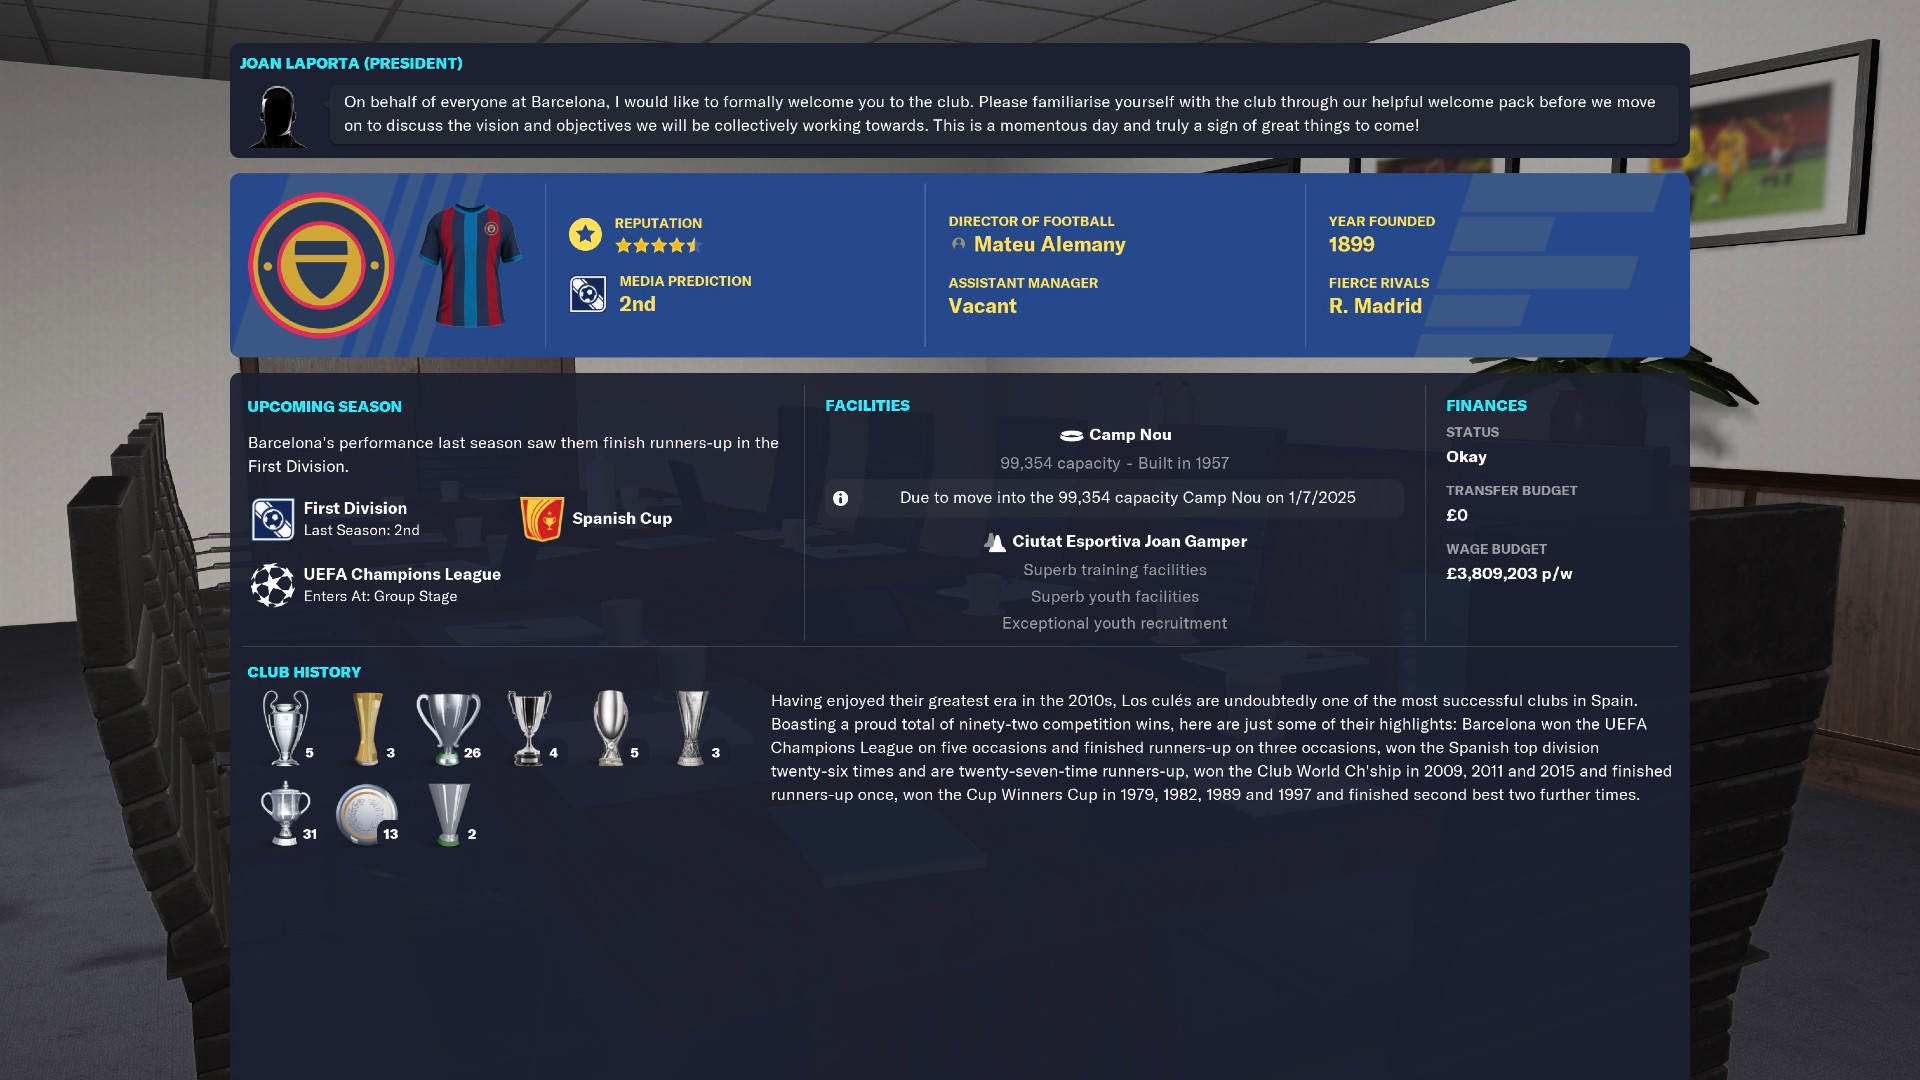 Hardest Teams to Manage on Football Manager 2022, FM Blog